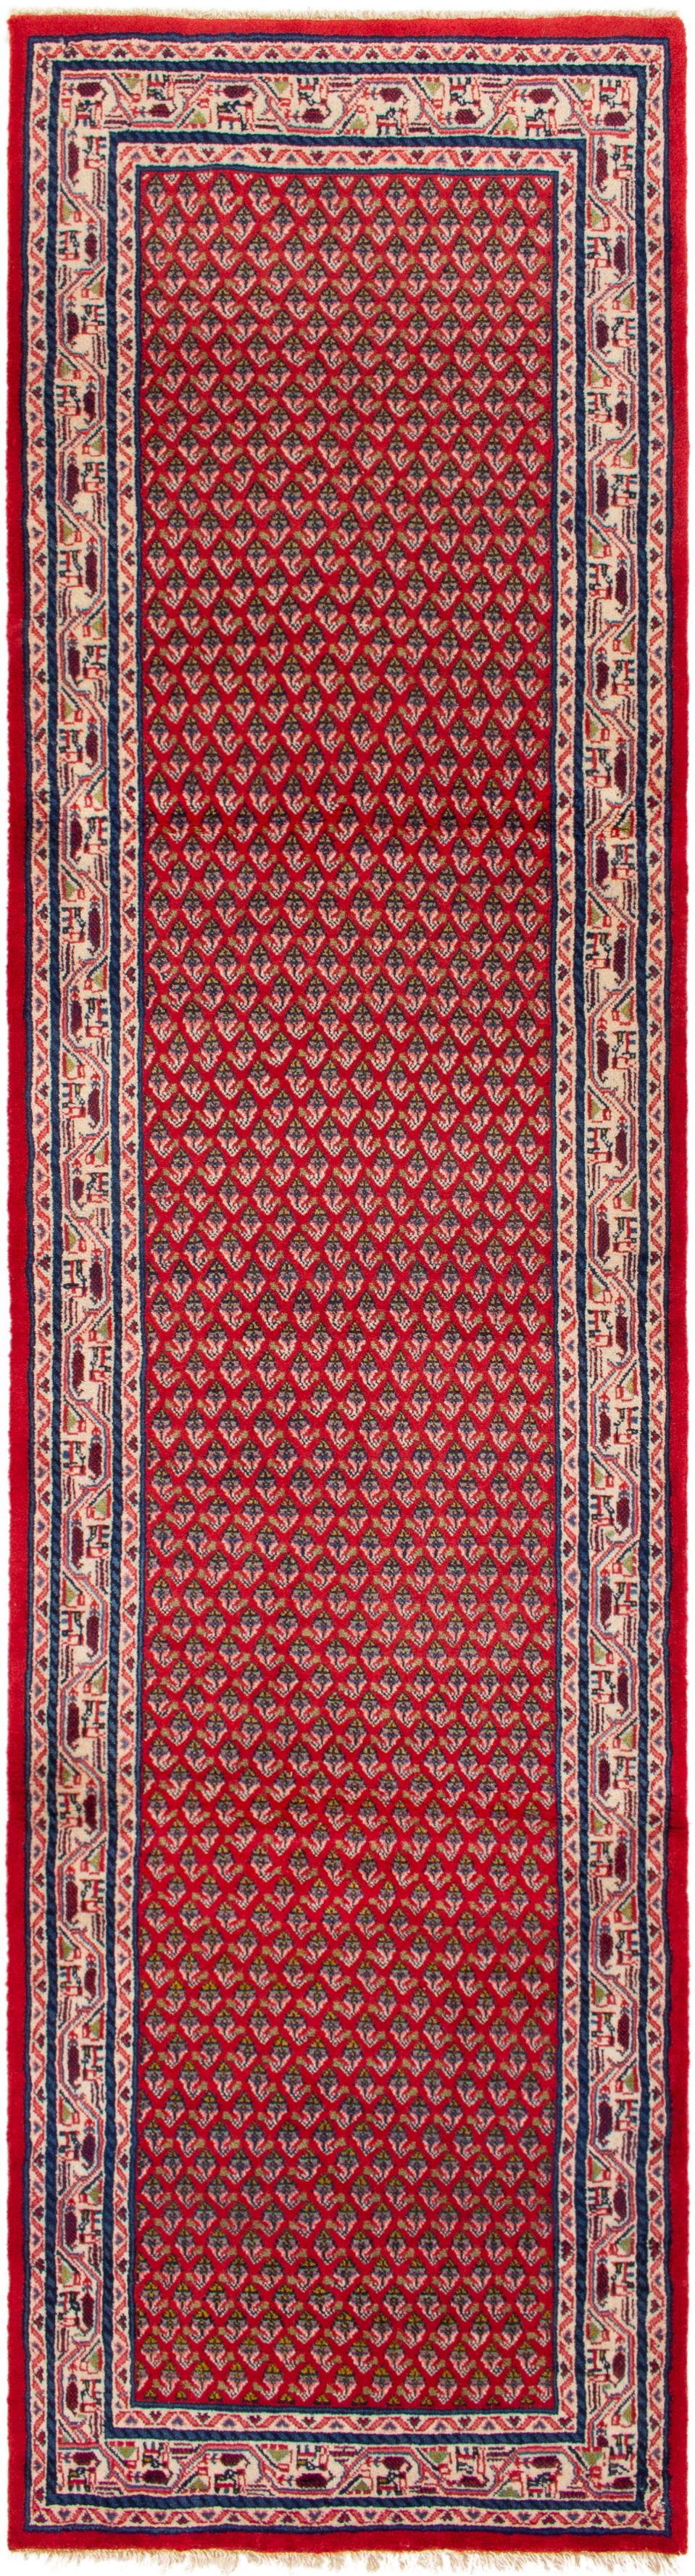 Hand-knotted Sarough  Wool Rug 2'8" x 10'4"  Size: 2'8" x 10'4"  